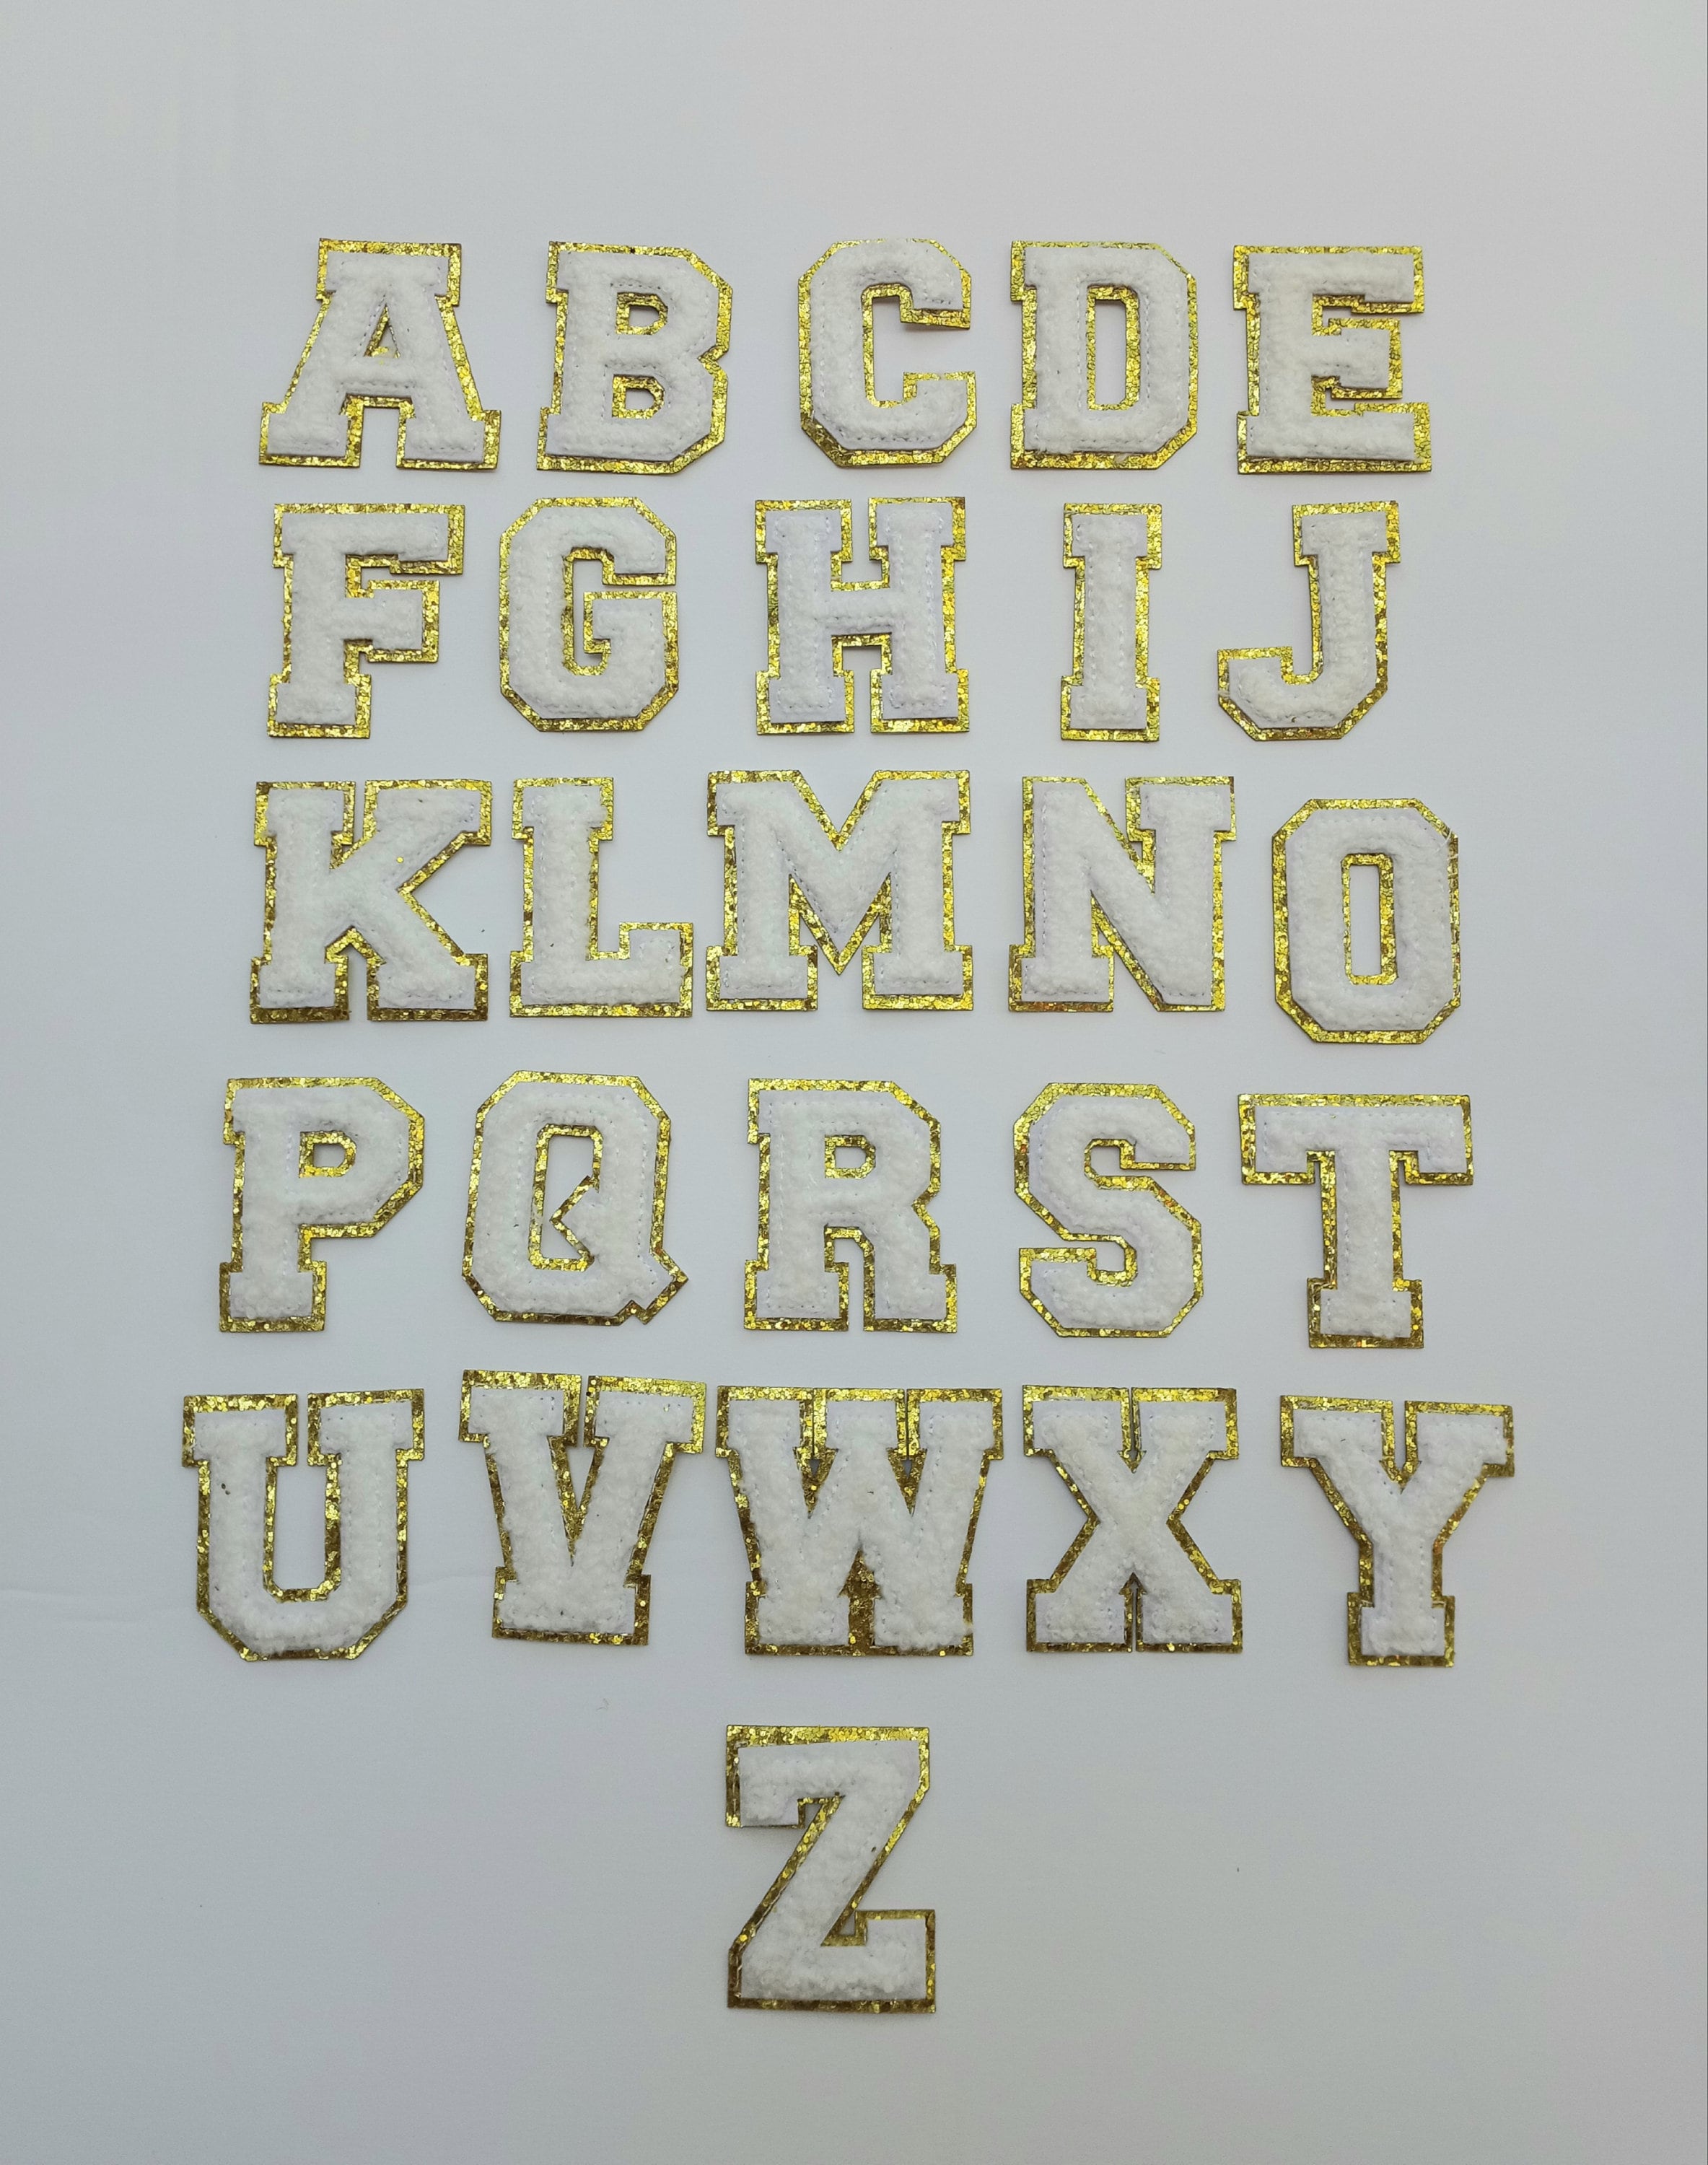  246 Pieces Large Glitter Letter Stickers 2 Inch